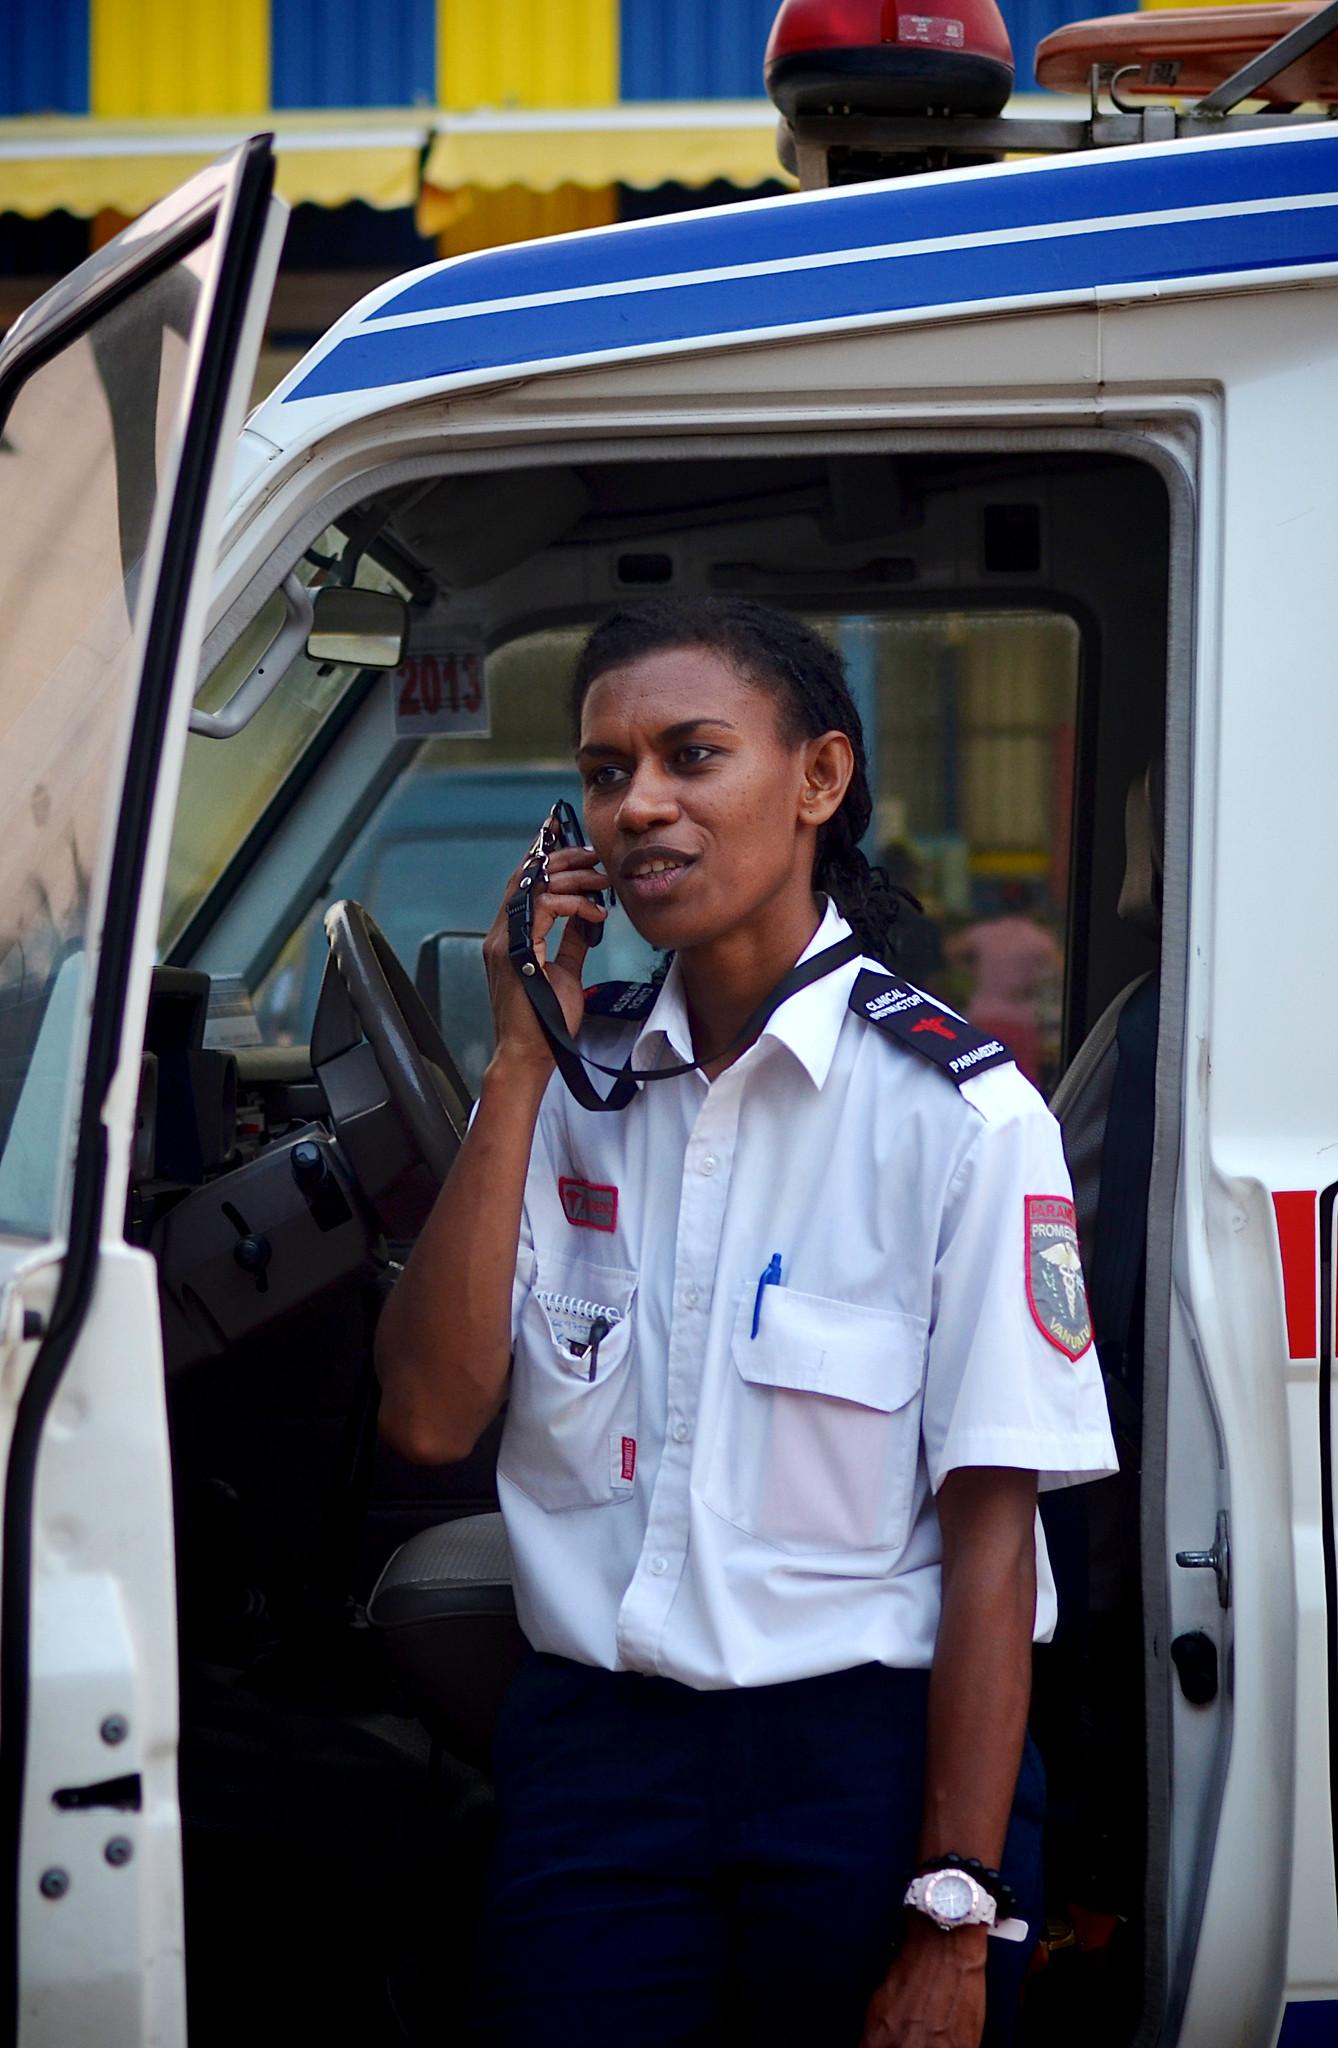 The arrival of improved mobile phone services has dramatically improved emergency services in Vanuatu.